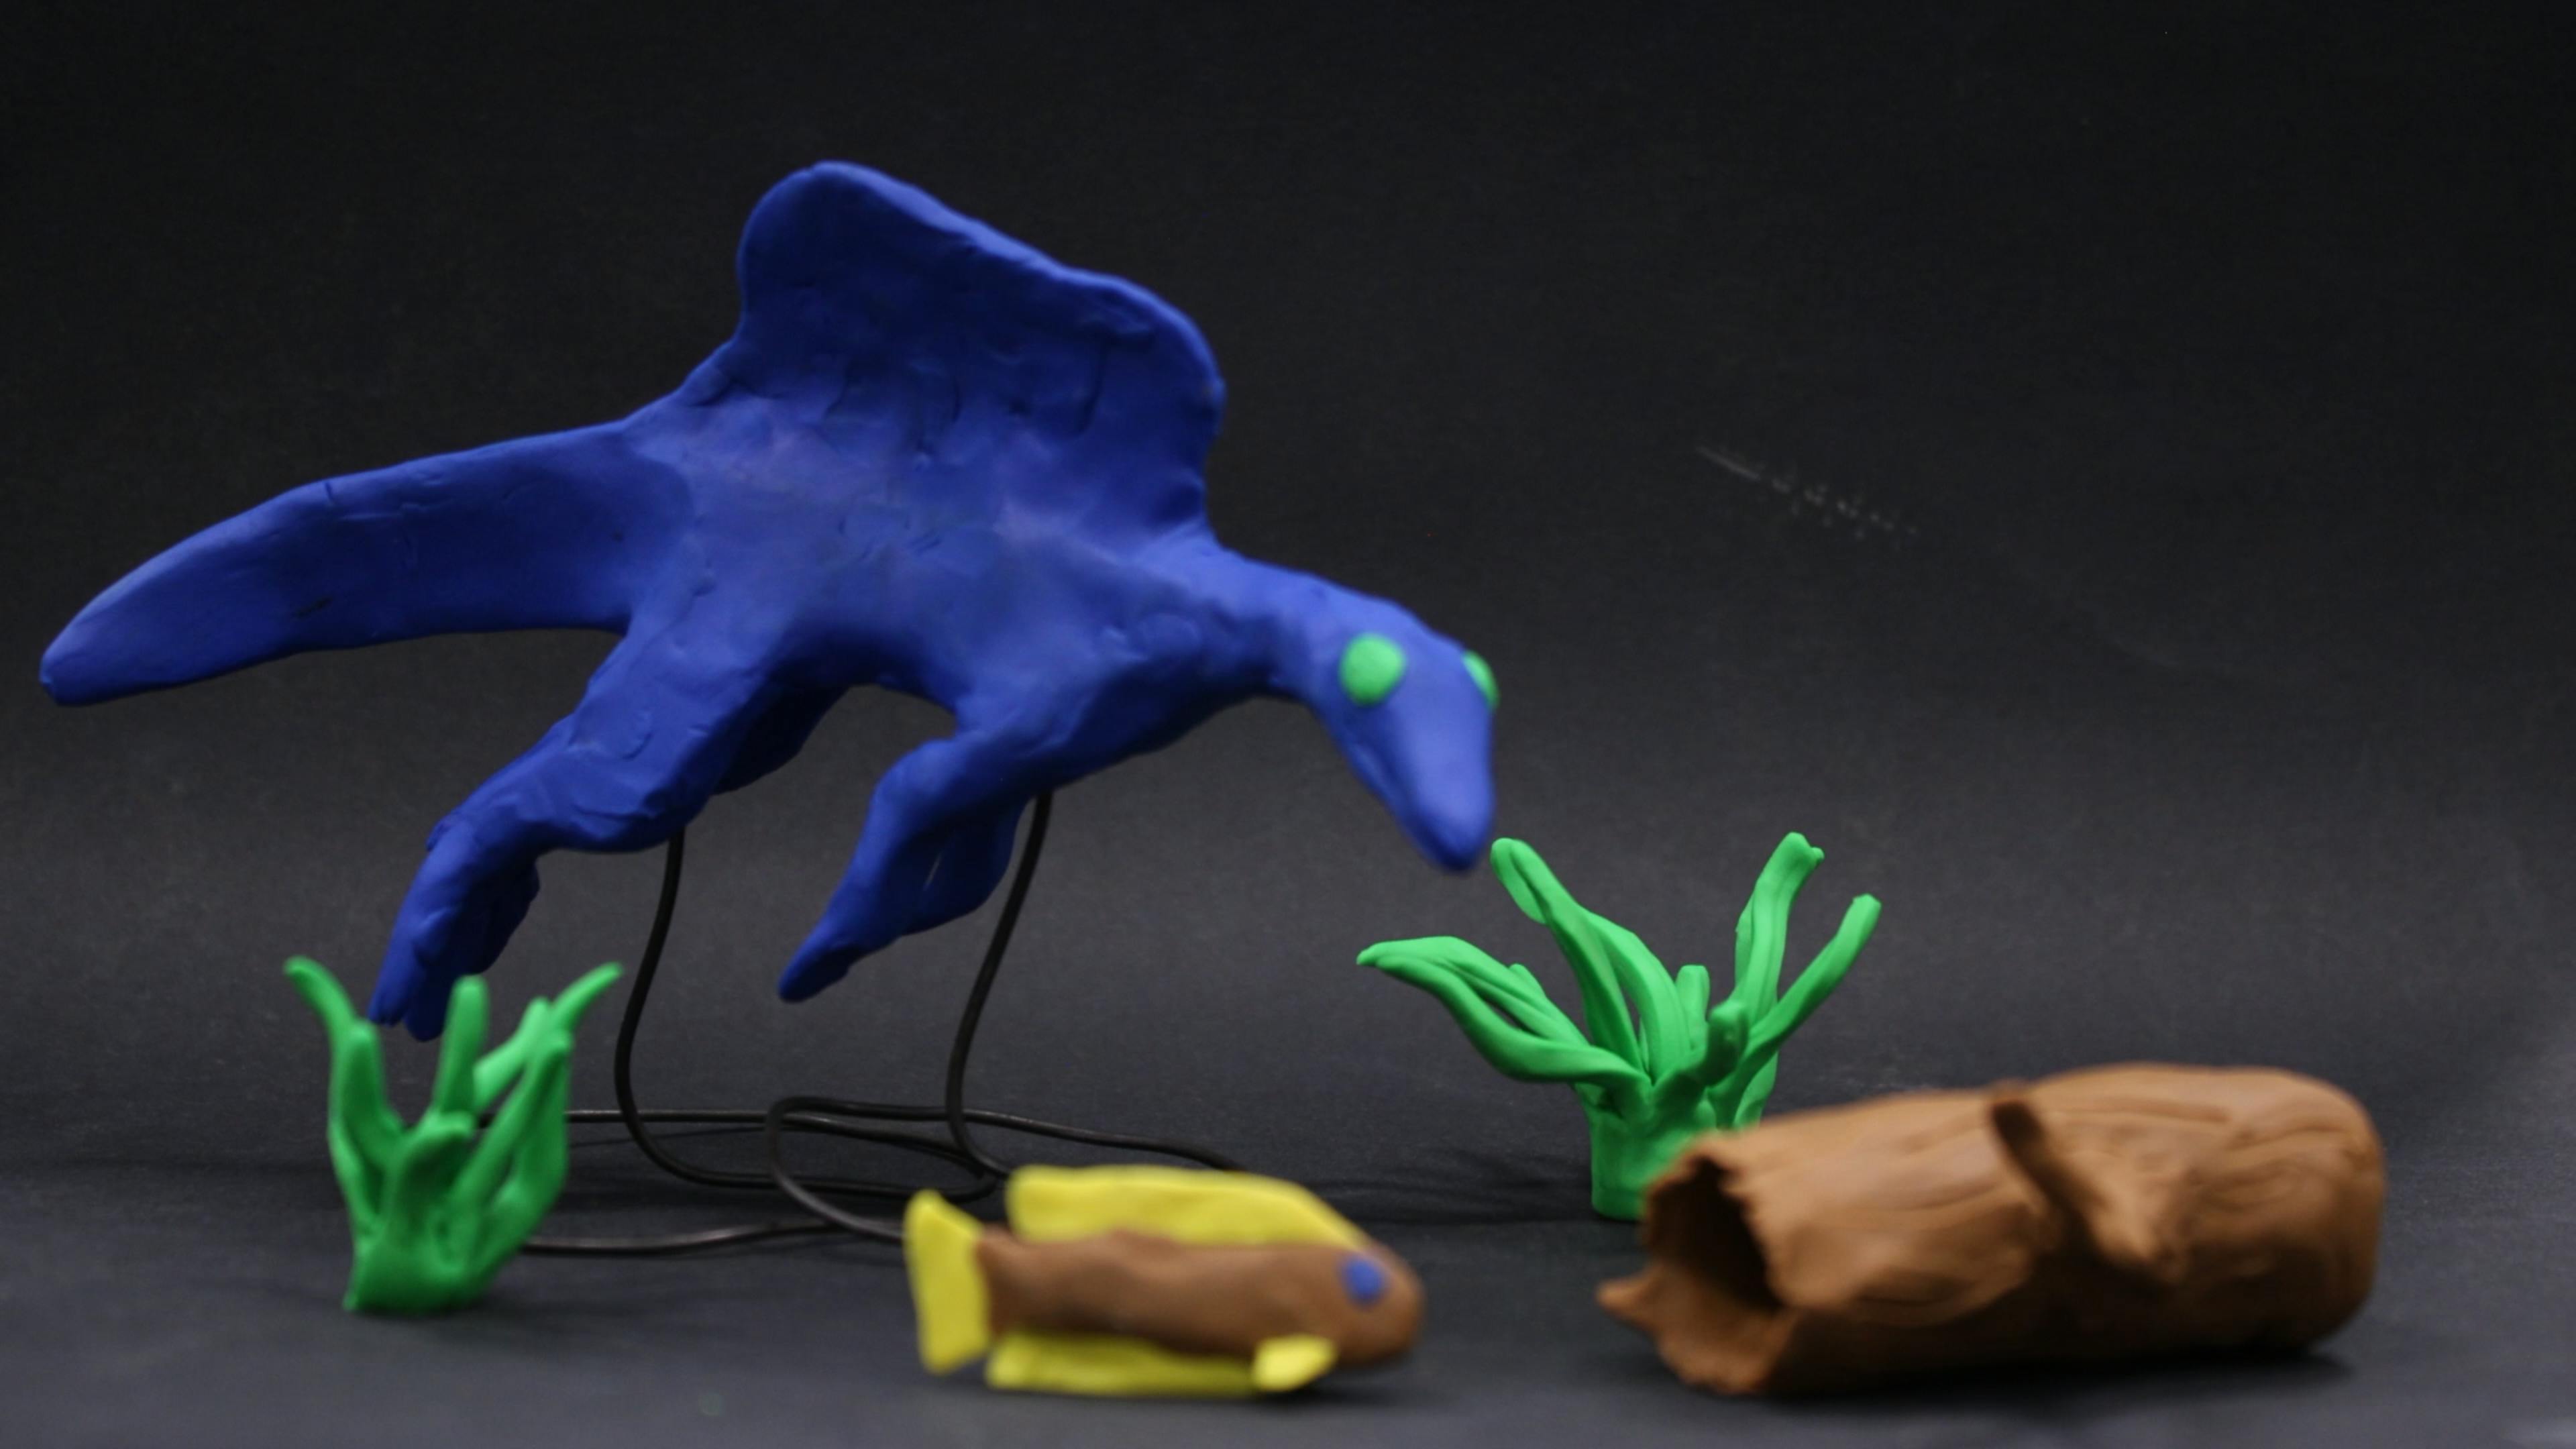 Claymation scene of a dinosaur swimming underwater and about to catch a fish